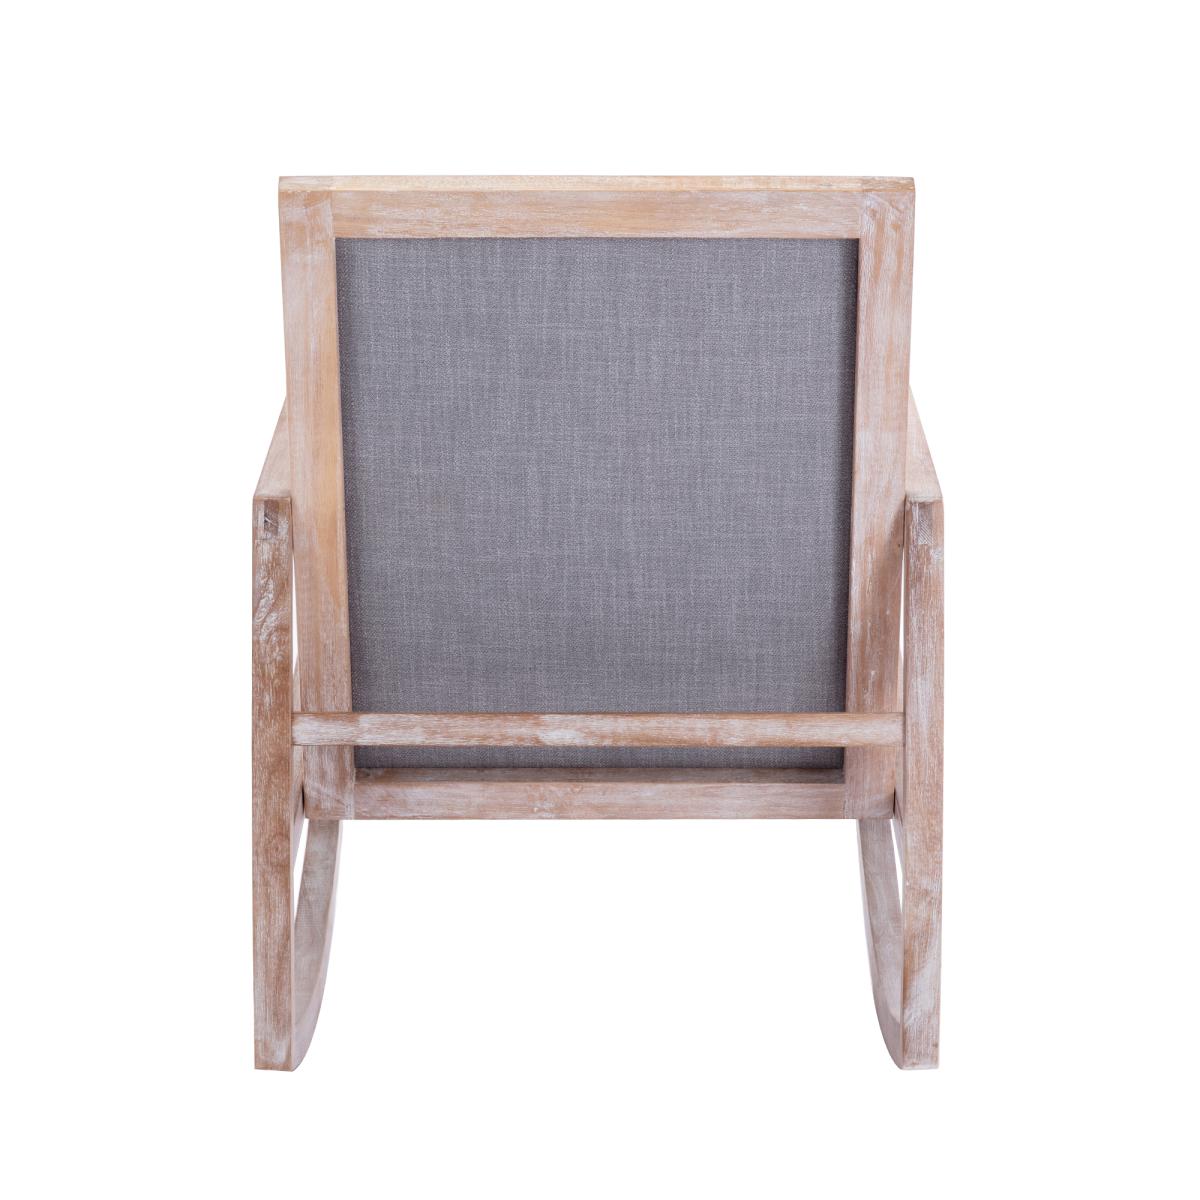 Solid wood linen fabric antique white wash painting rocking chair with removable lumbar pillow